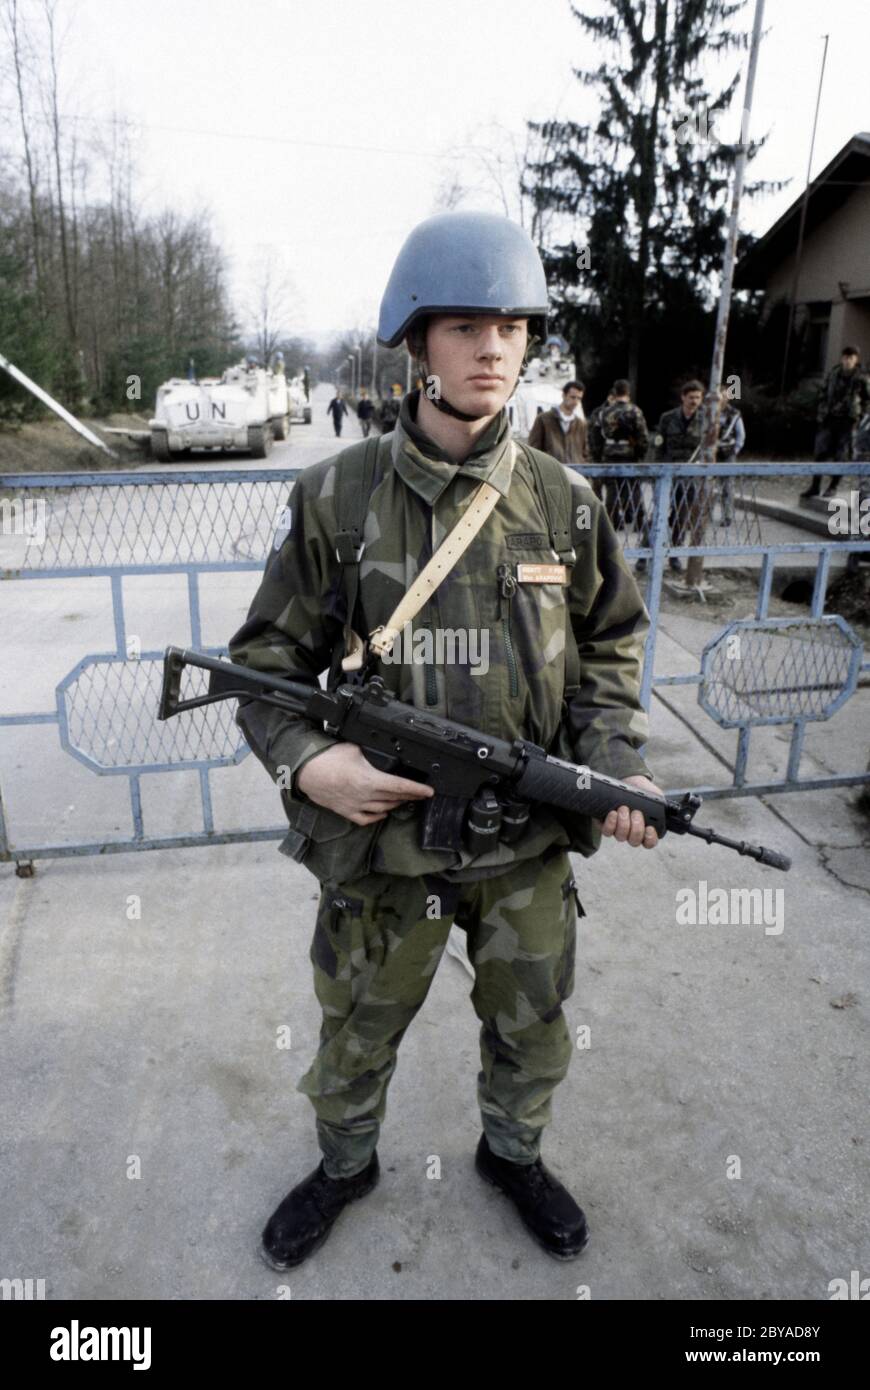 7th March 1994 During the war in Bosnia: armed with an Ak 5 (Automatkarbin 5) assault rifle, Private Arapovic, a Swedish soldier of Nordbat 2, stands guard at the gates to Tuzla Airport. Stock Photo